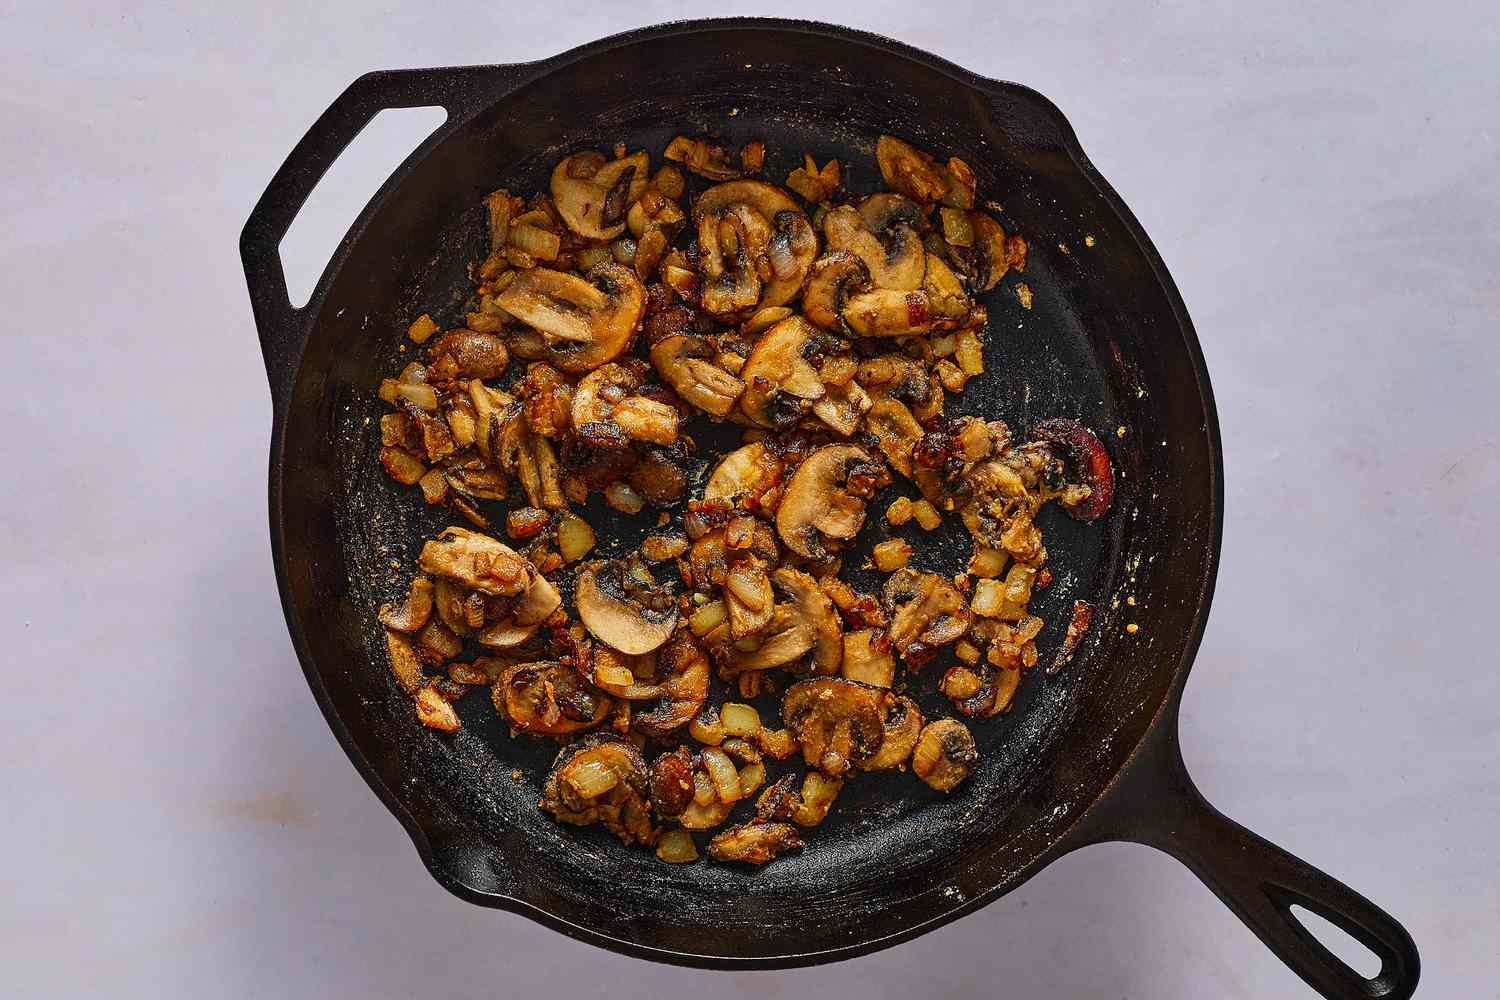 Flour added to the skillet of mushrooms